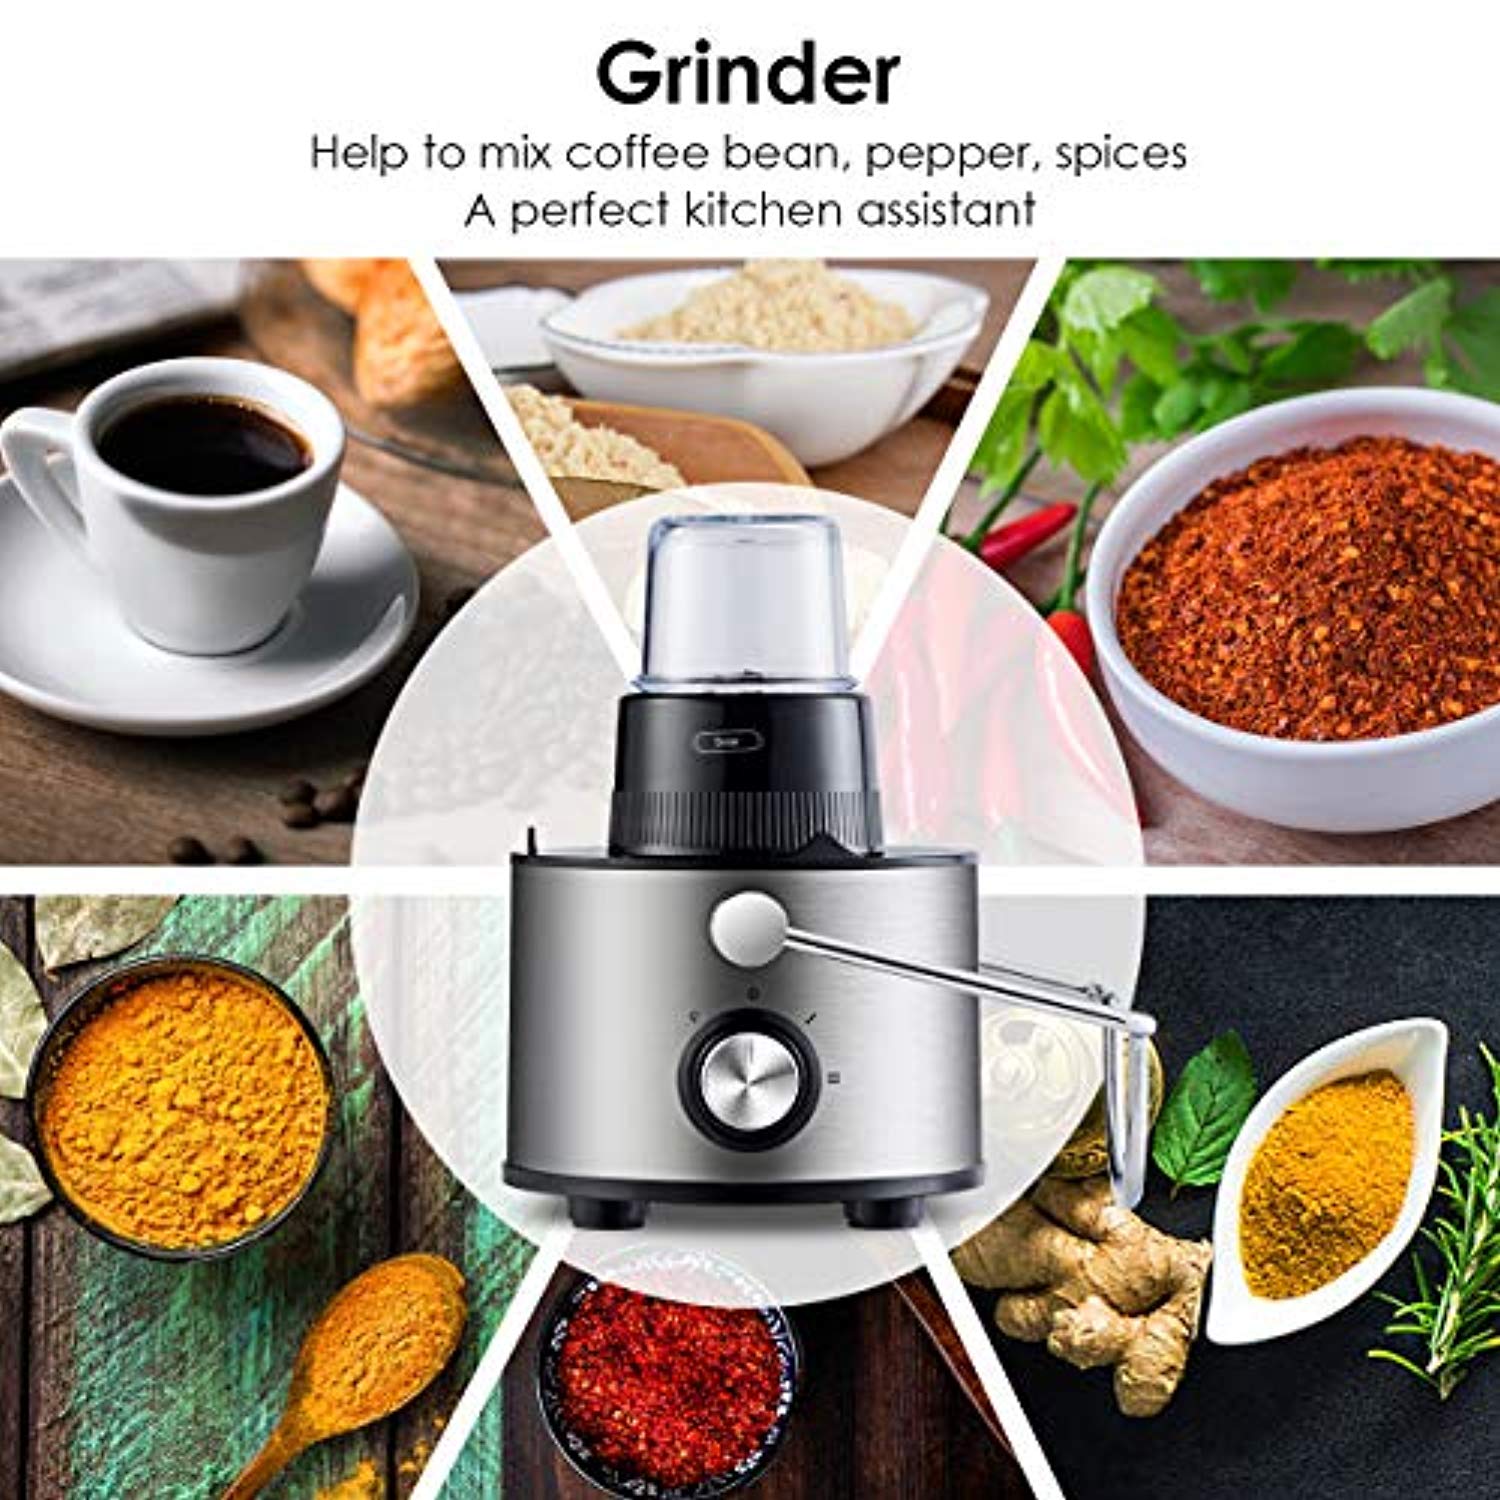 Electric 5-in-1 Professional Food Processor and Juicer Combo